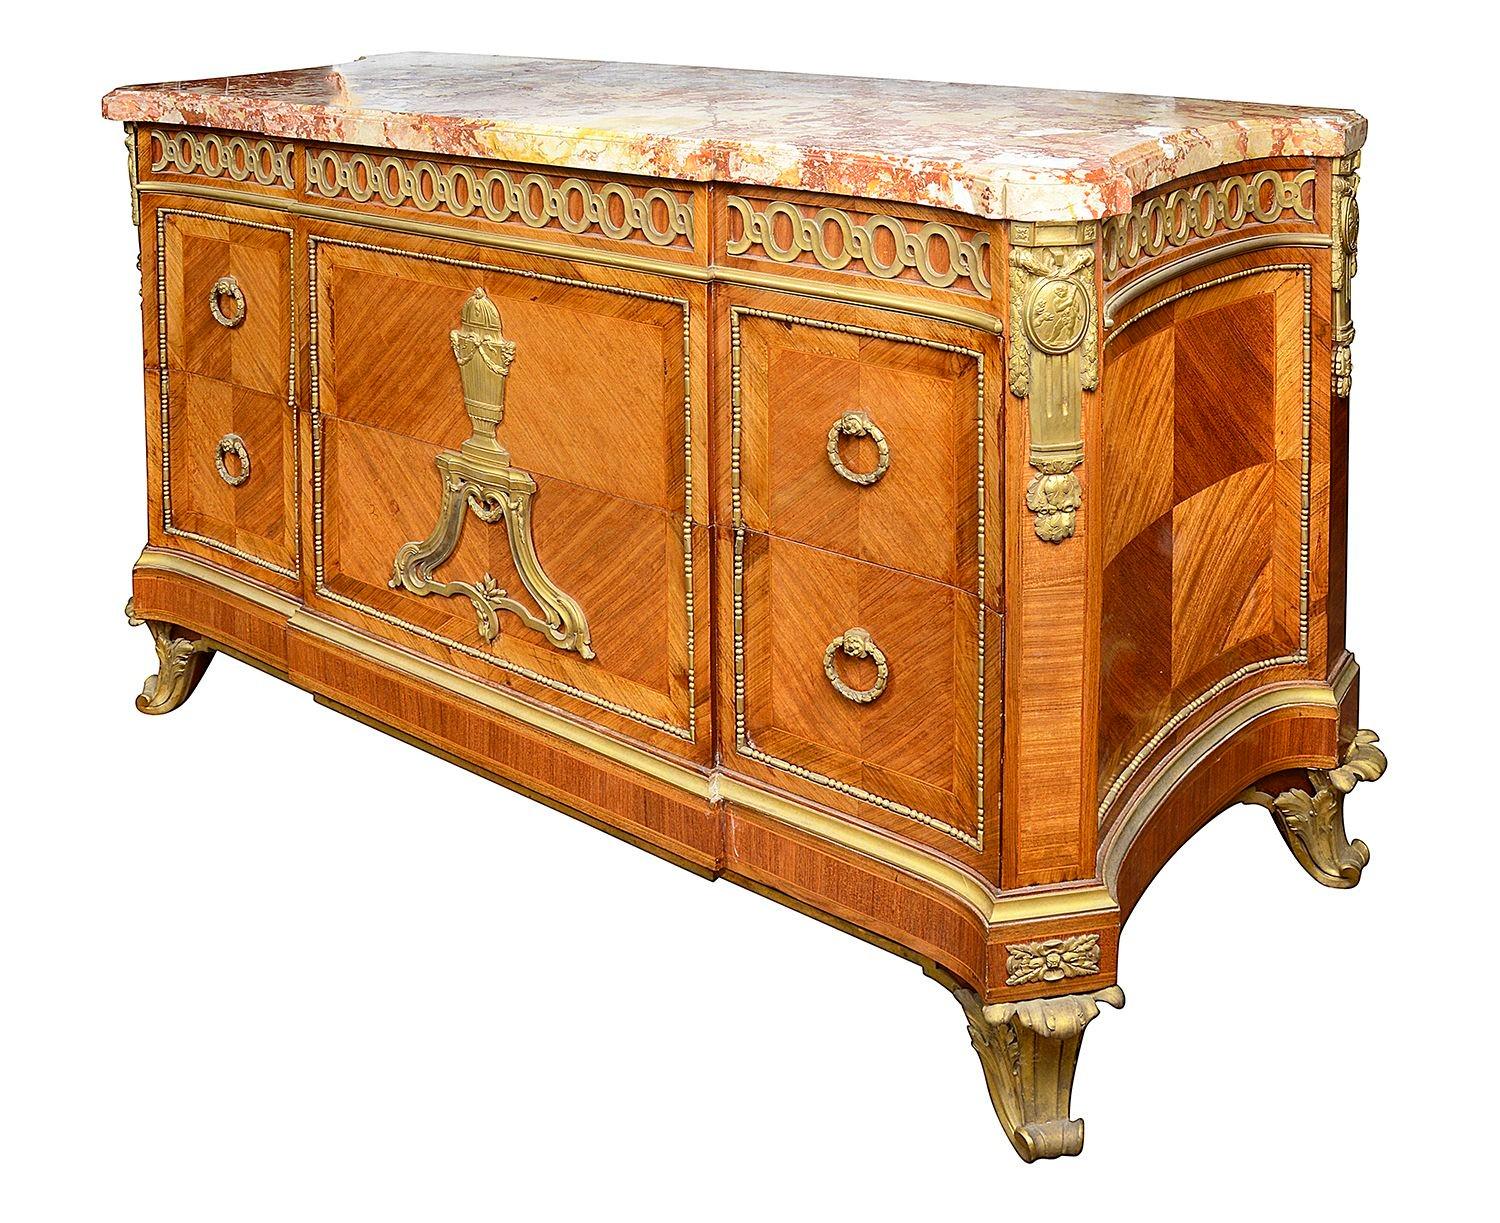 A very impressive French Louis XVI style, 19th Century Marble topped commode, having wonderful gilded ormolu mounts and mouldings, quartered veneers to the drawer fronts and sides. Having the original Breccia marble top, an ormolu classical urn on